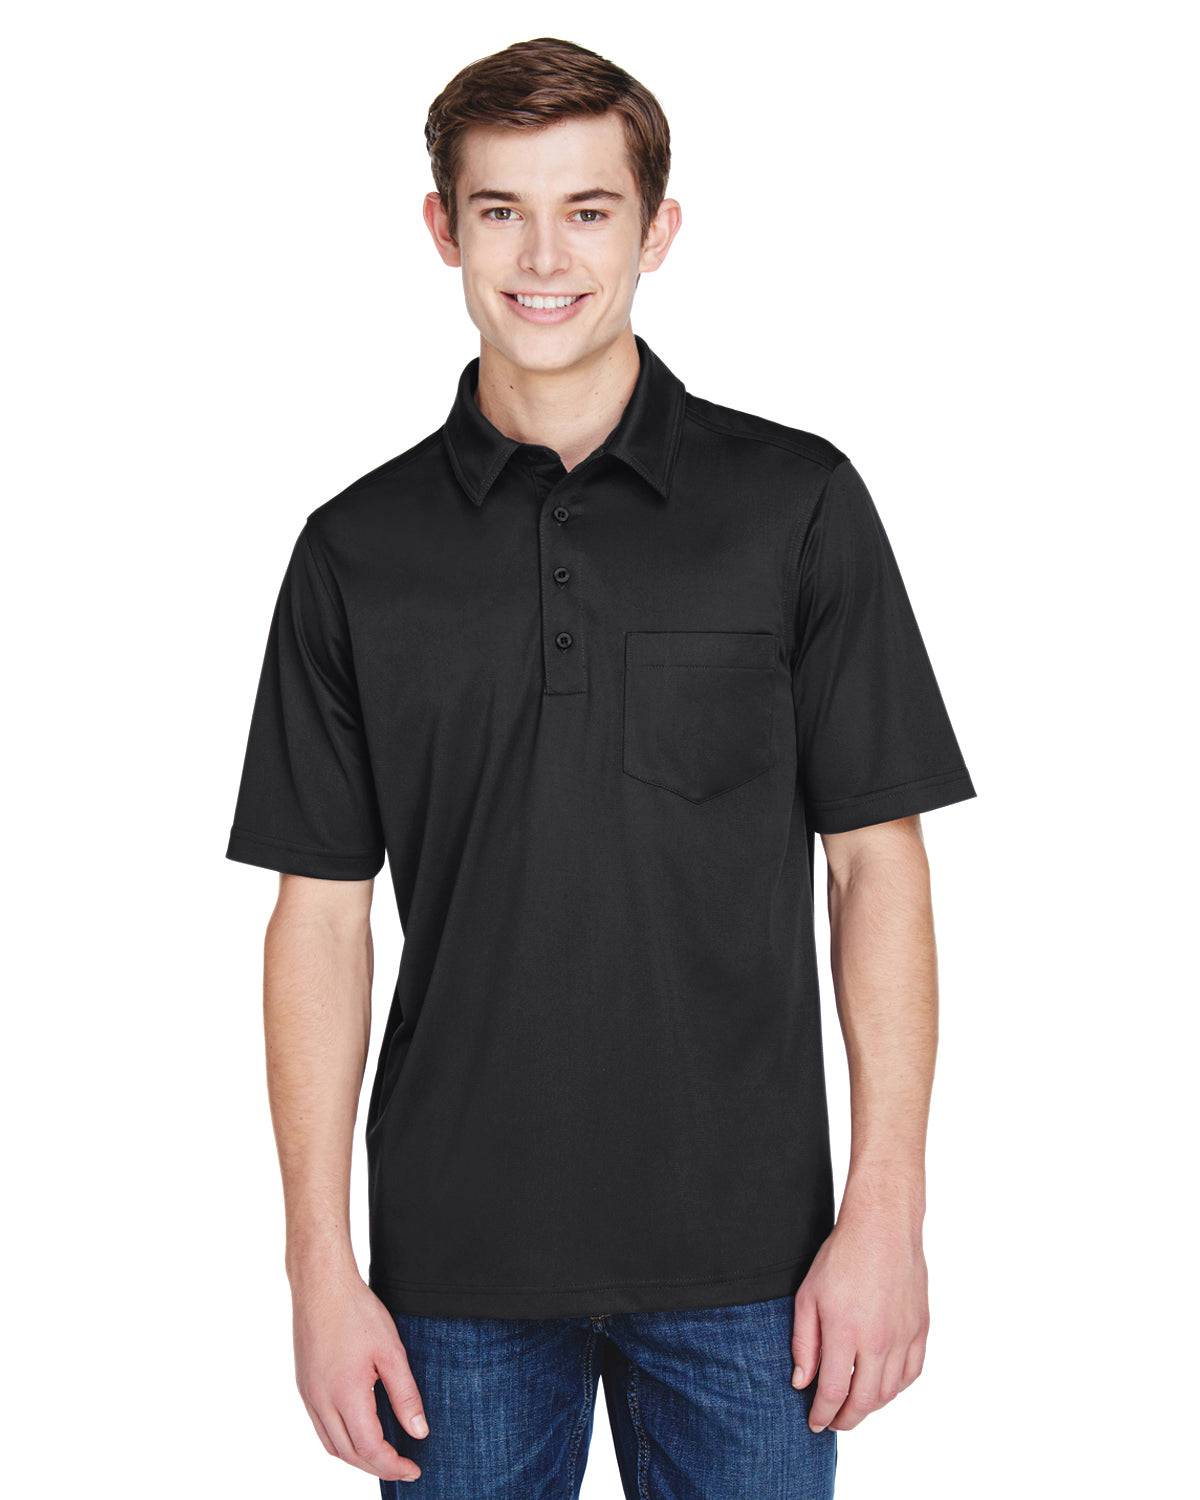 Rainwater's Straight Collar Pocket Knit Polo in Charcoal - Rainwater's Men's Clothing and Tuxedo Rental